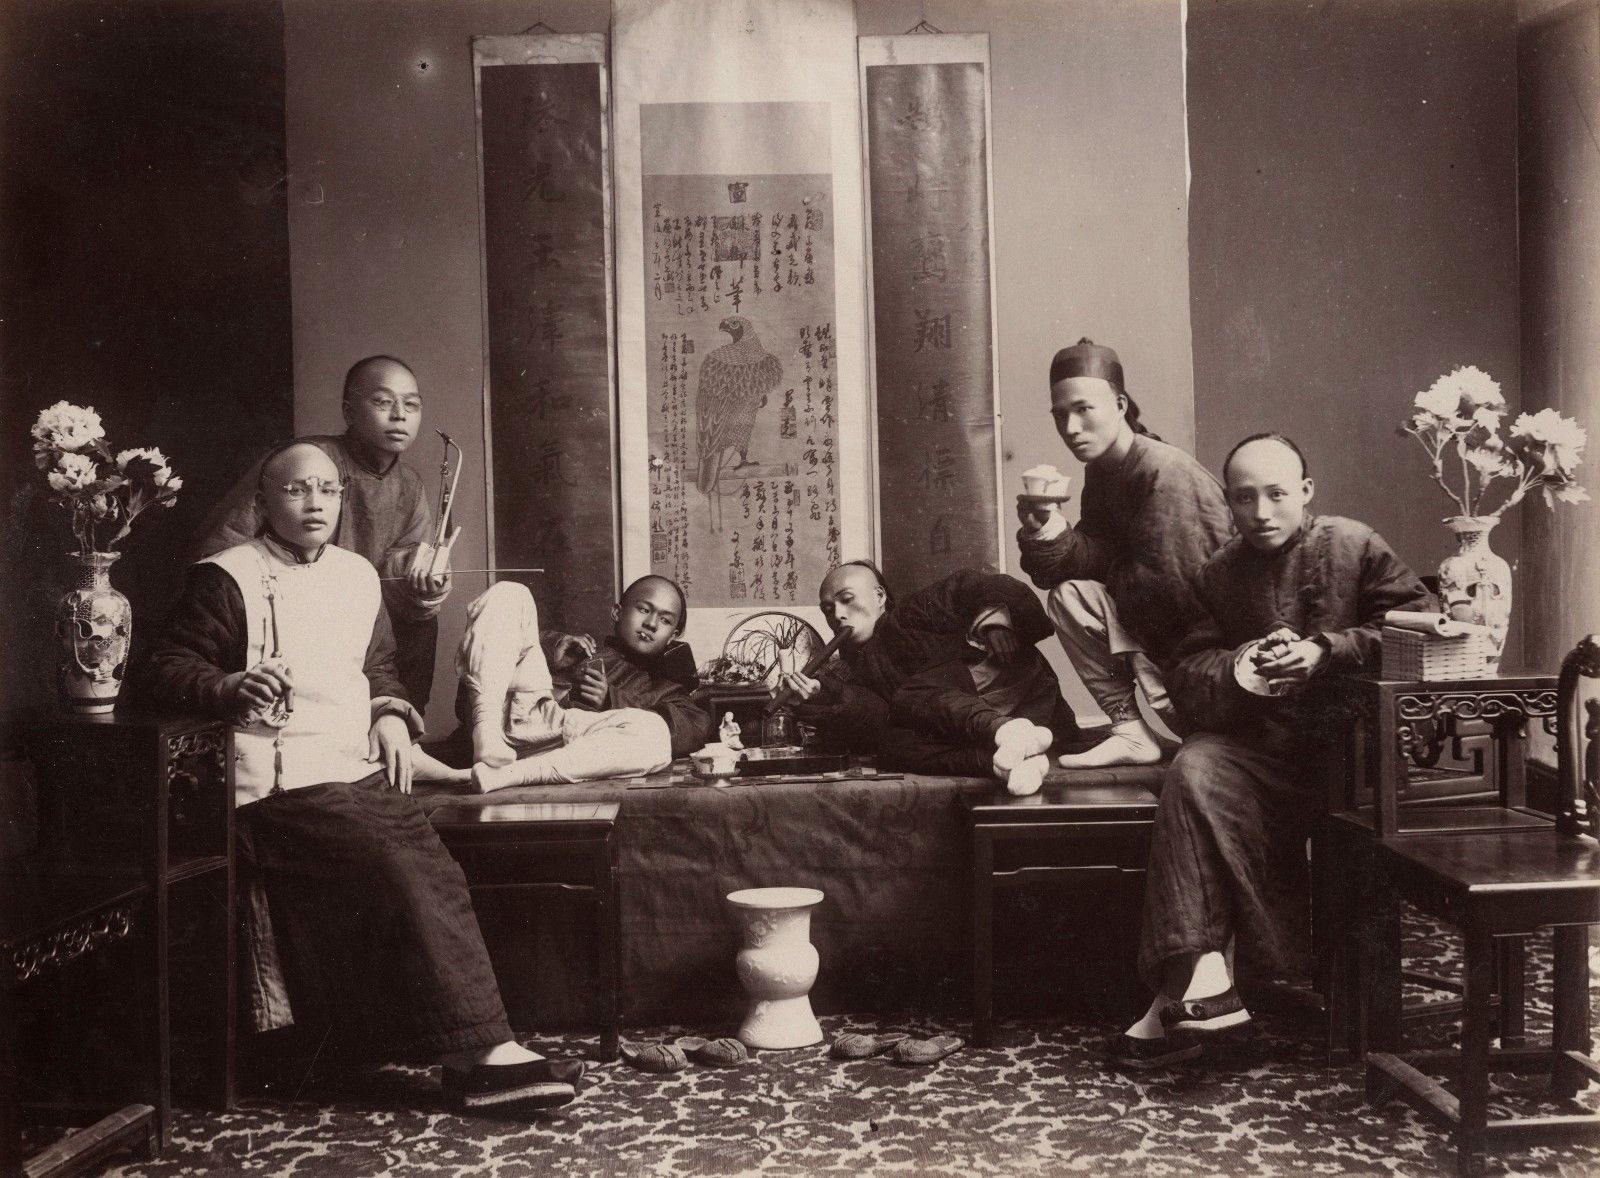 Opium smokers in China, in the 1880s [Lai Afong/Public Domain]